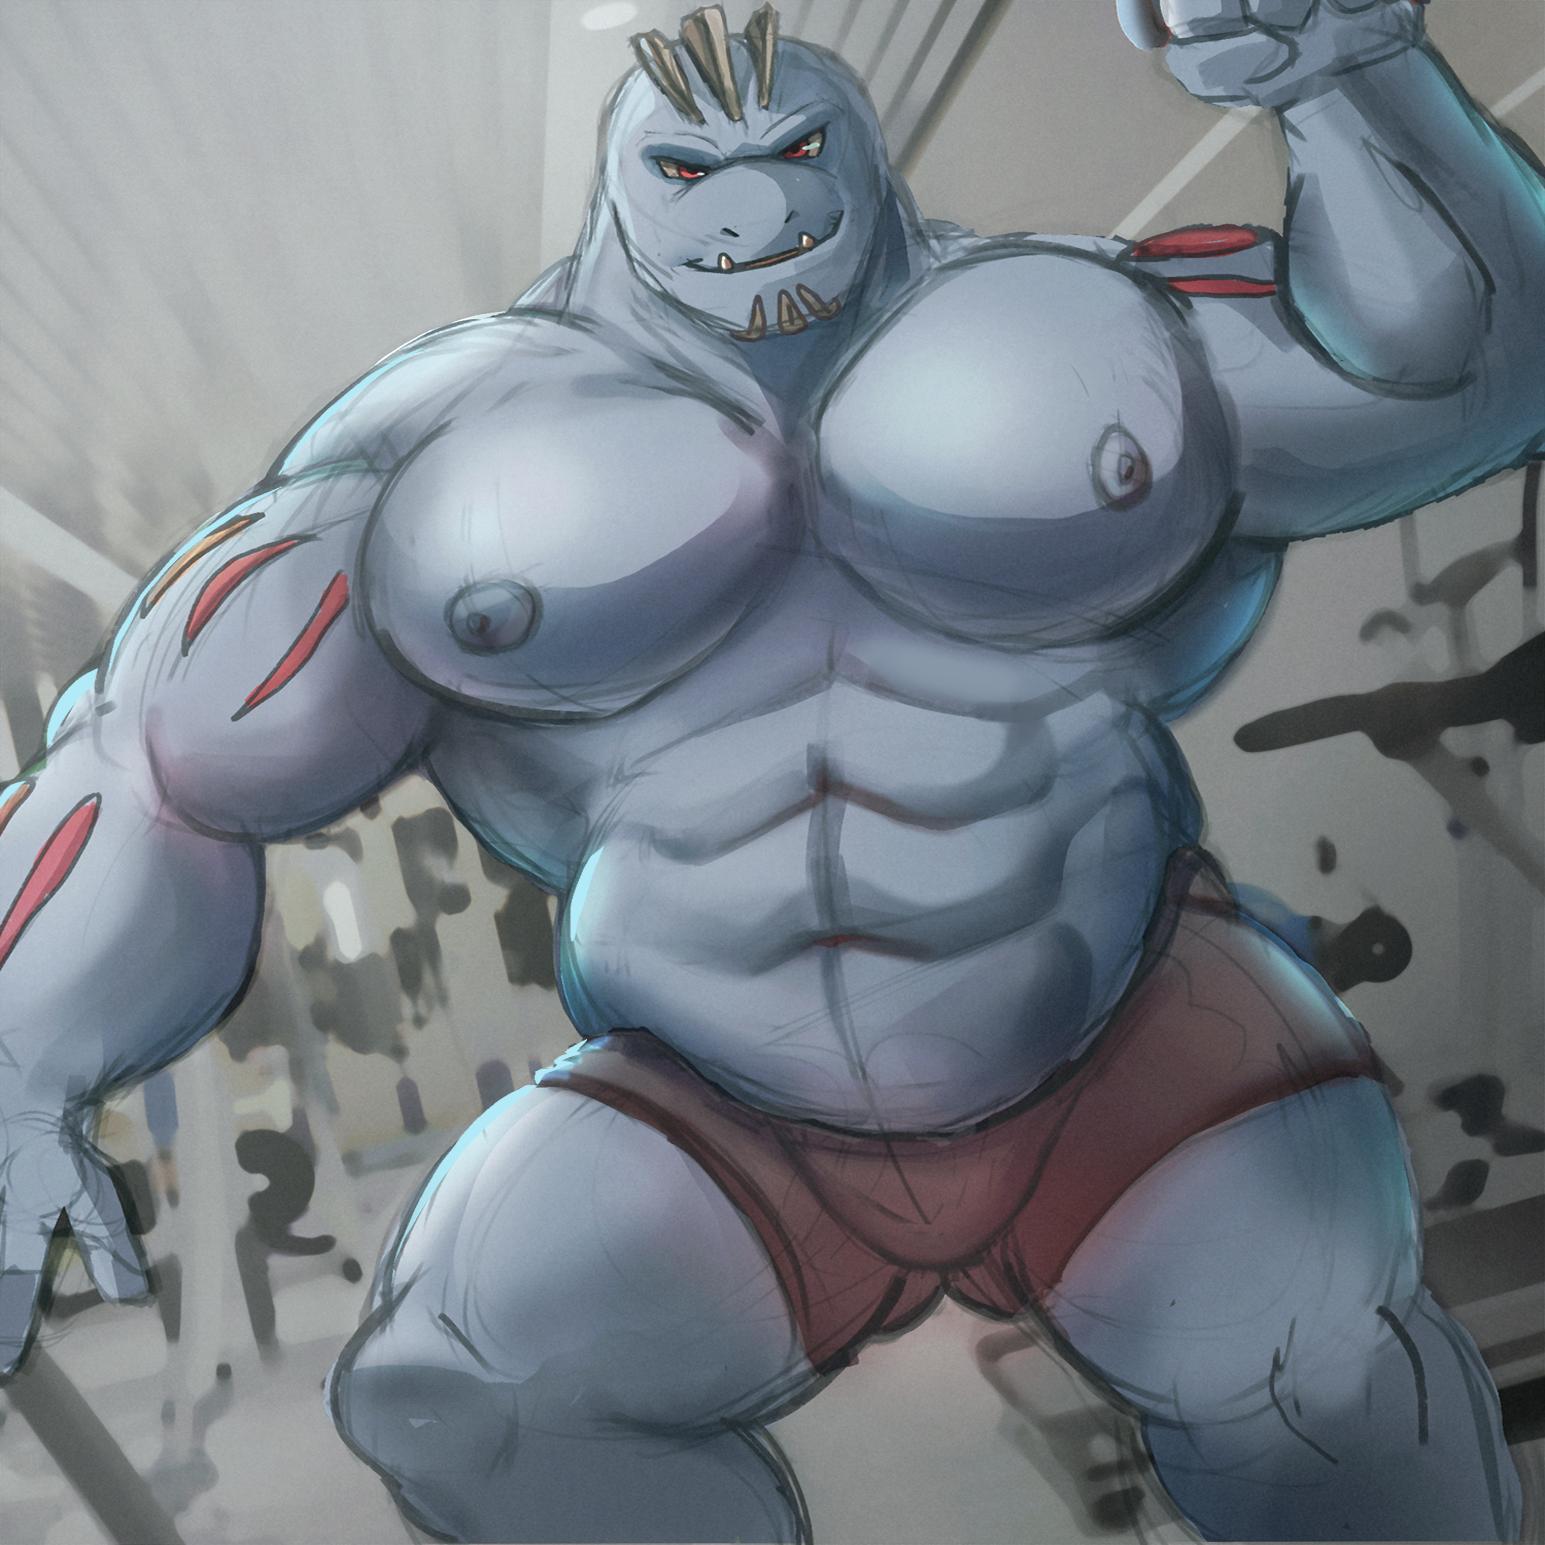 “A quick drawing pf Machoke before bed settles my adventures in the dream o...